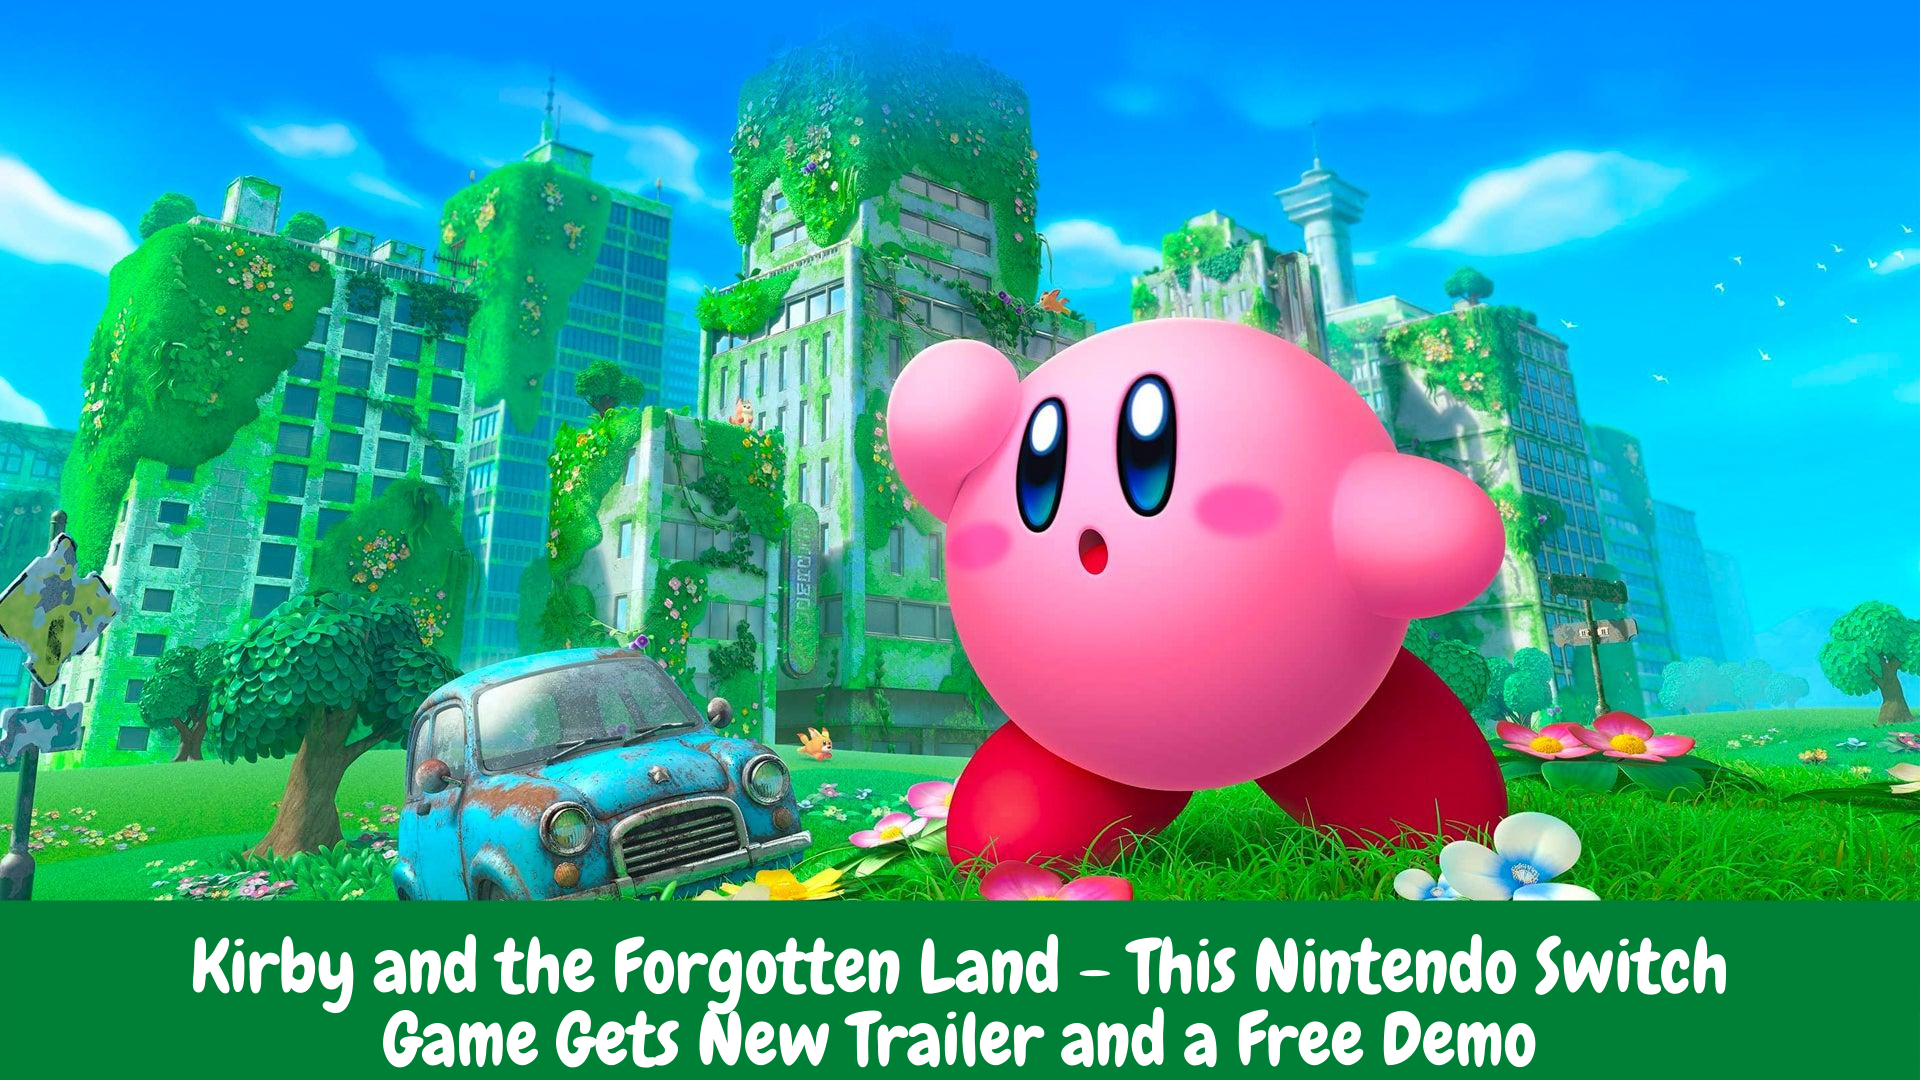 Kirby and the Forgotten Land - This Nintendo Switch Game Gets New Trailer and a Free Demo